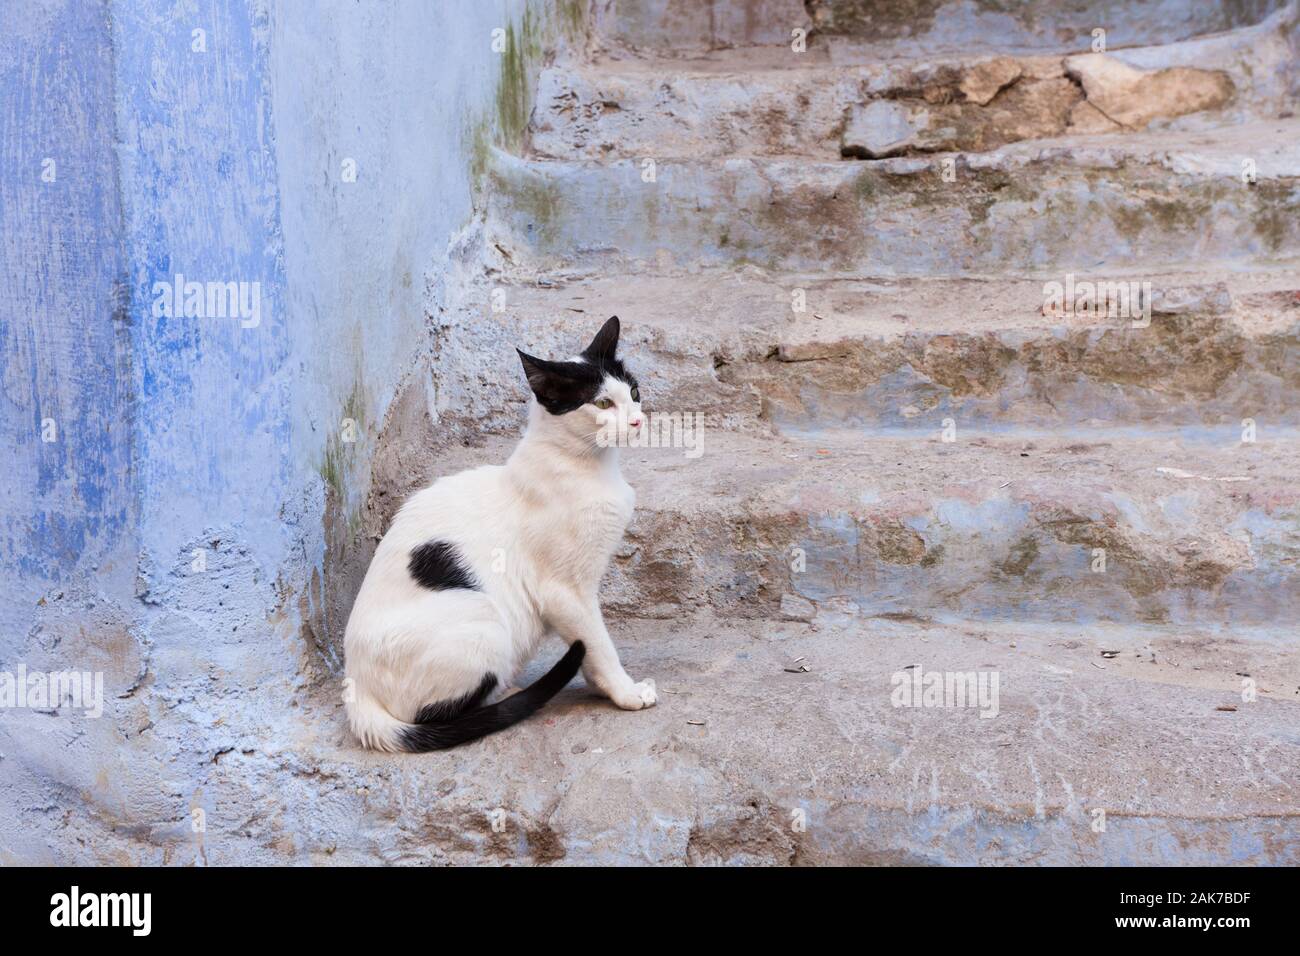 Black and white cat sitting on a step in medina of Chefchaouen (also known as Chaouen), Morocco Stock Photo